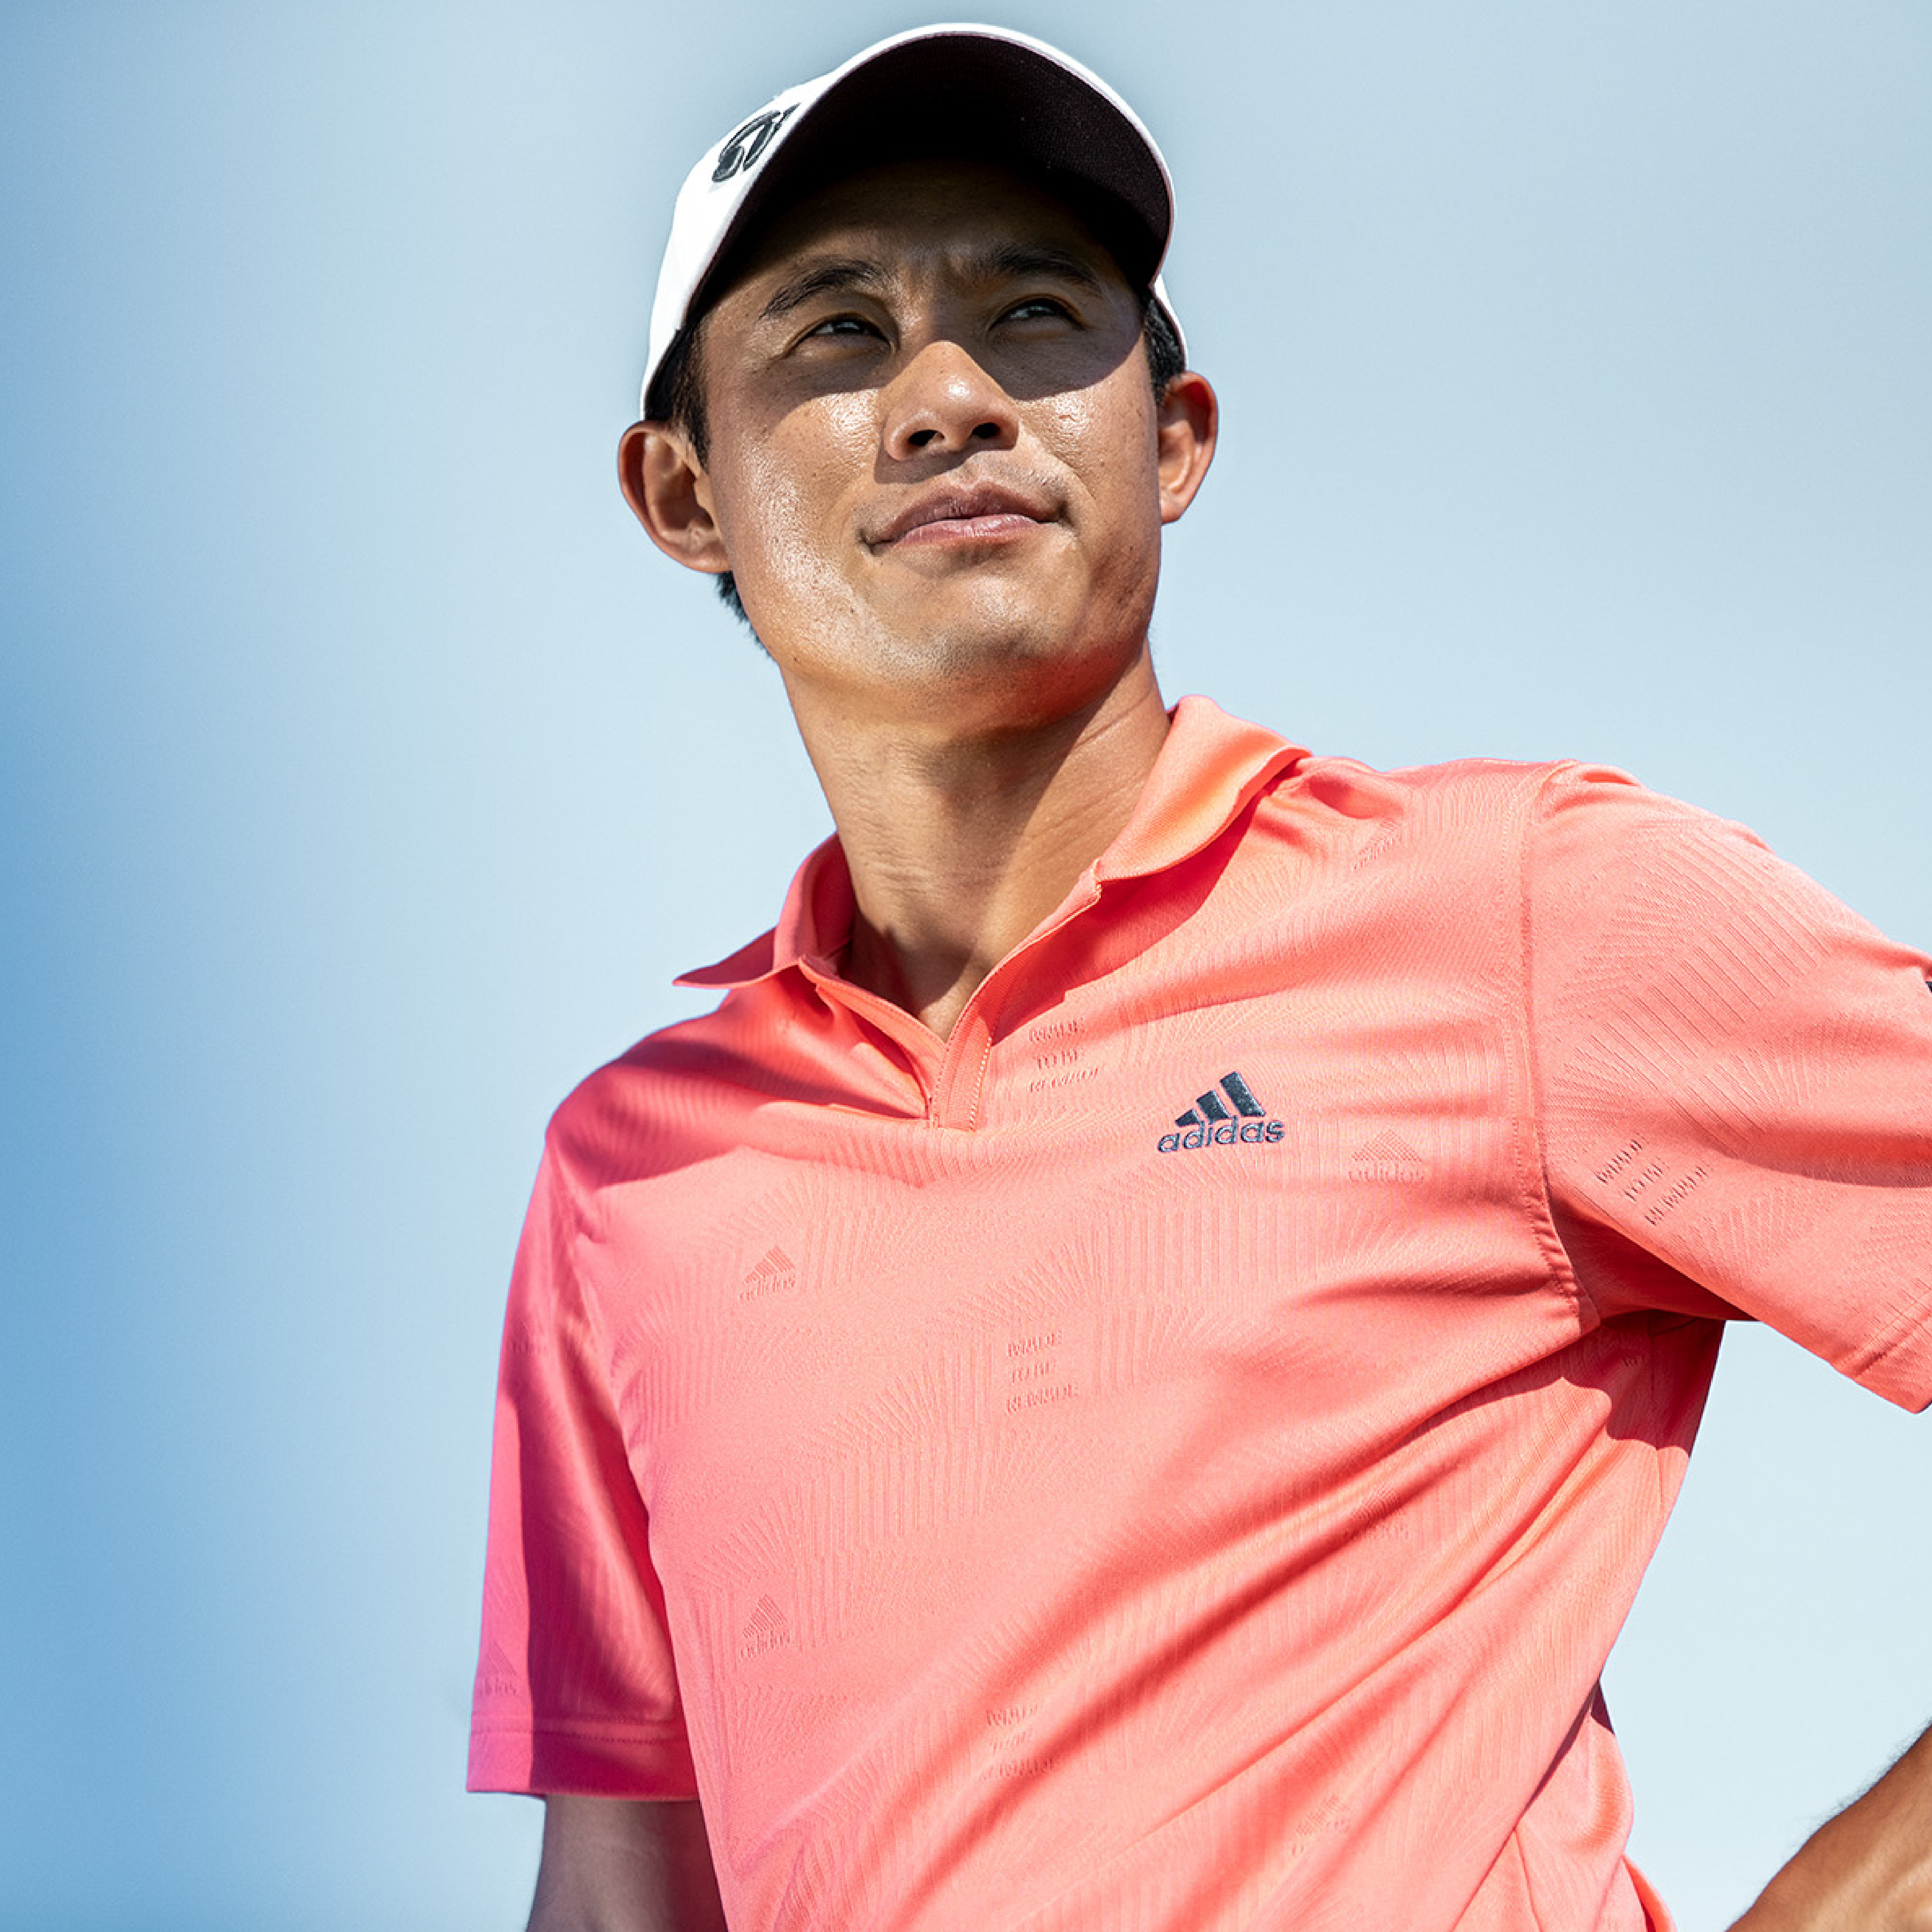 slutpunkt håndtering Forventer Give this sustainable polo shirt back to Adidas once you've worn it out |  Golf Equipment: Clubs, Balls, Bags | Golf Digest